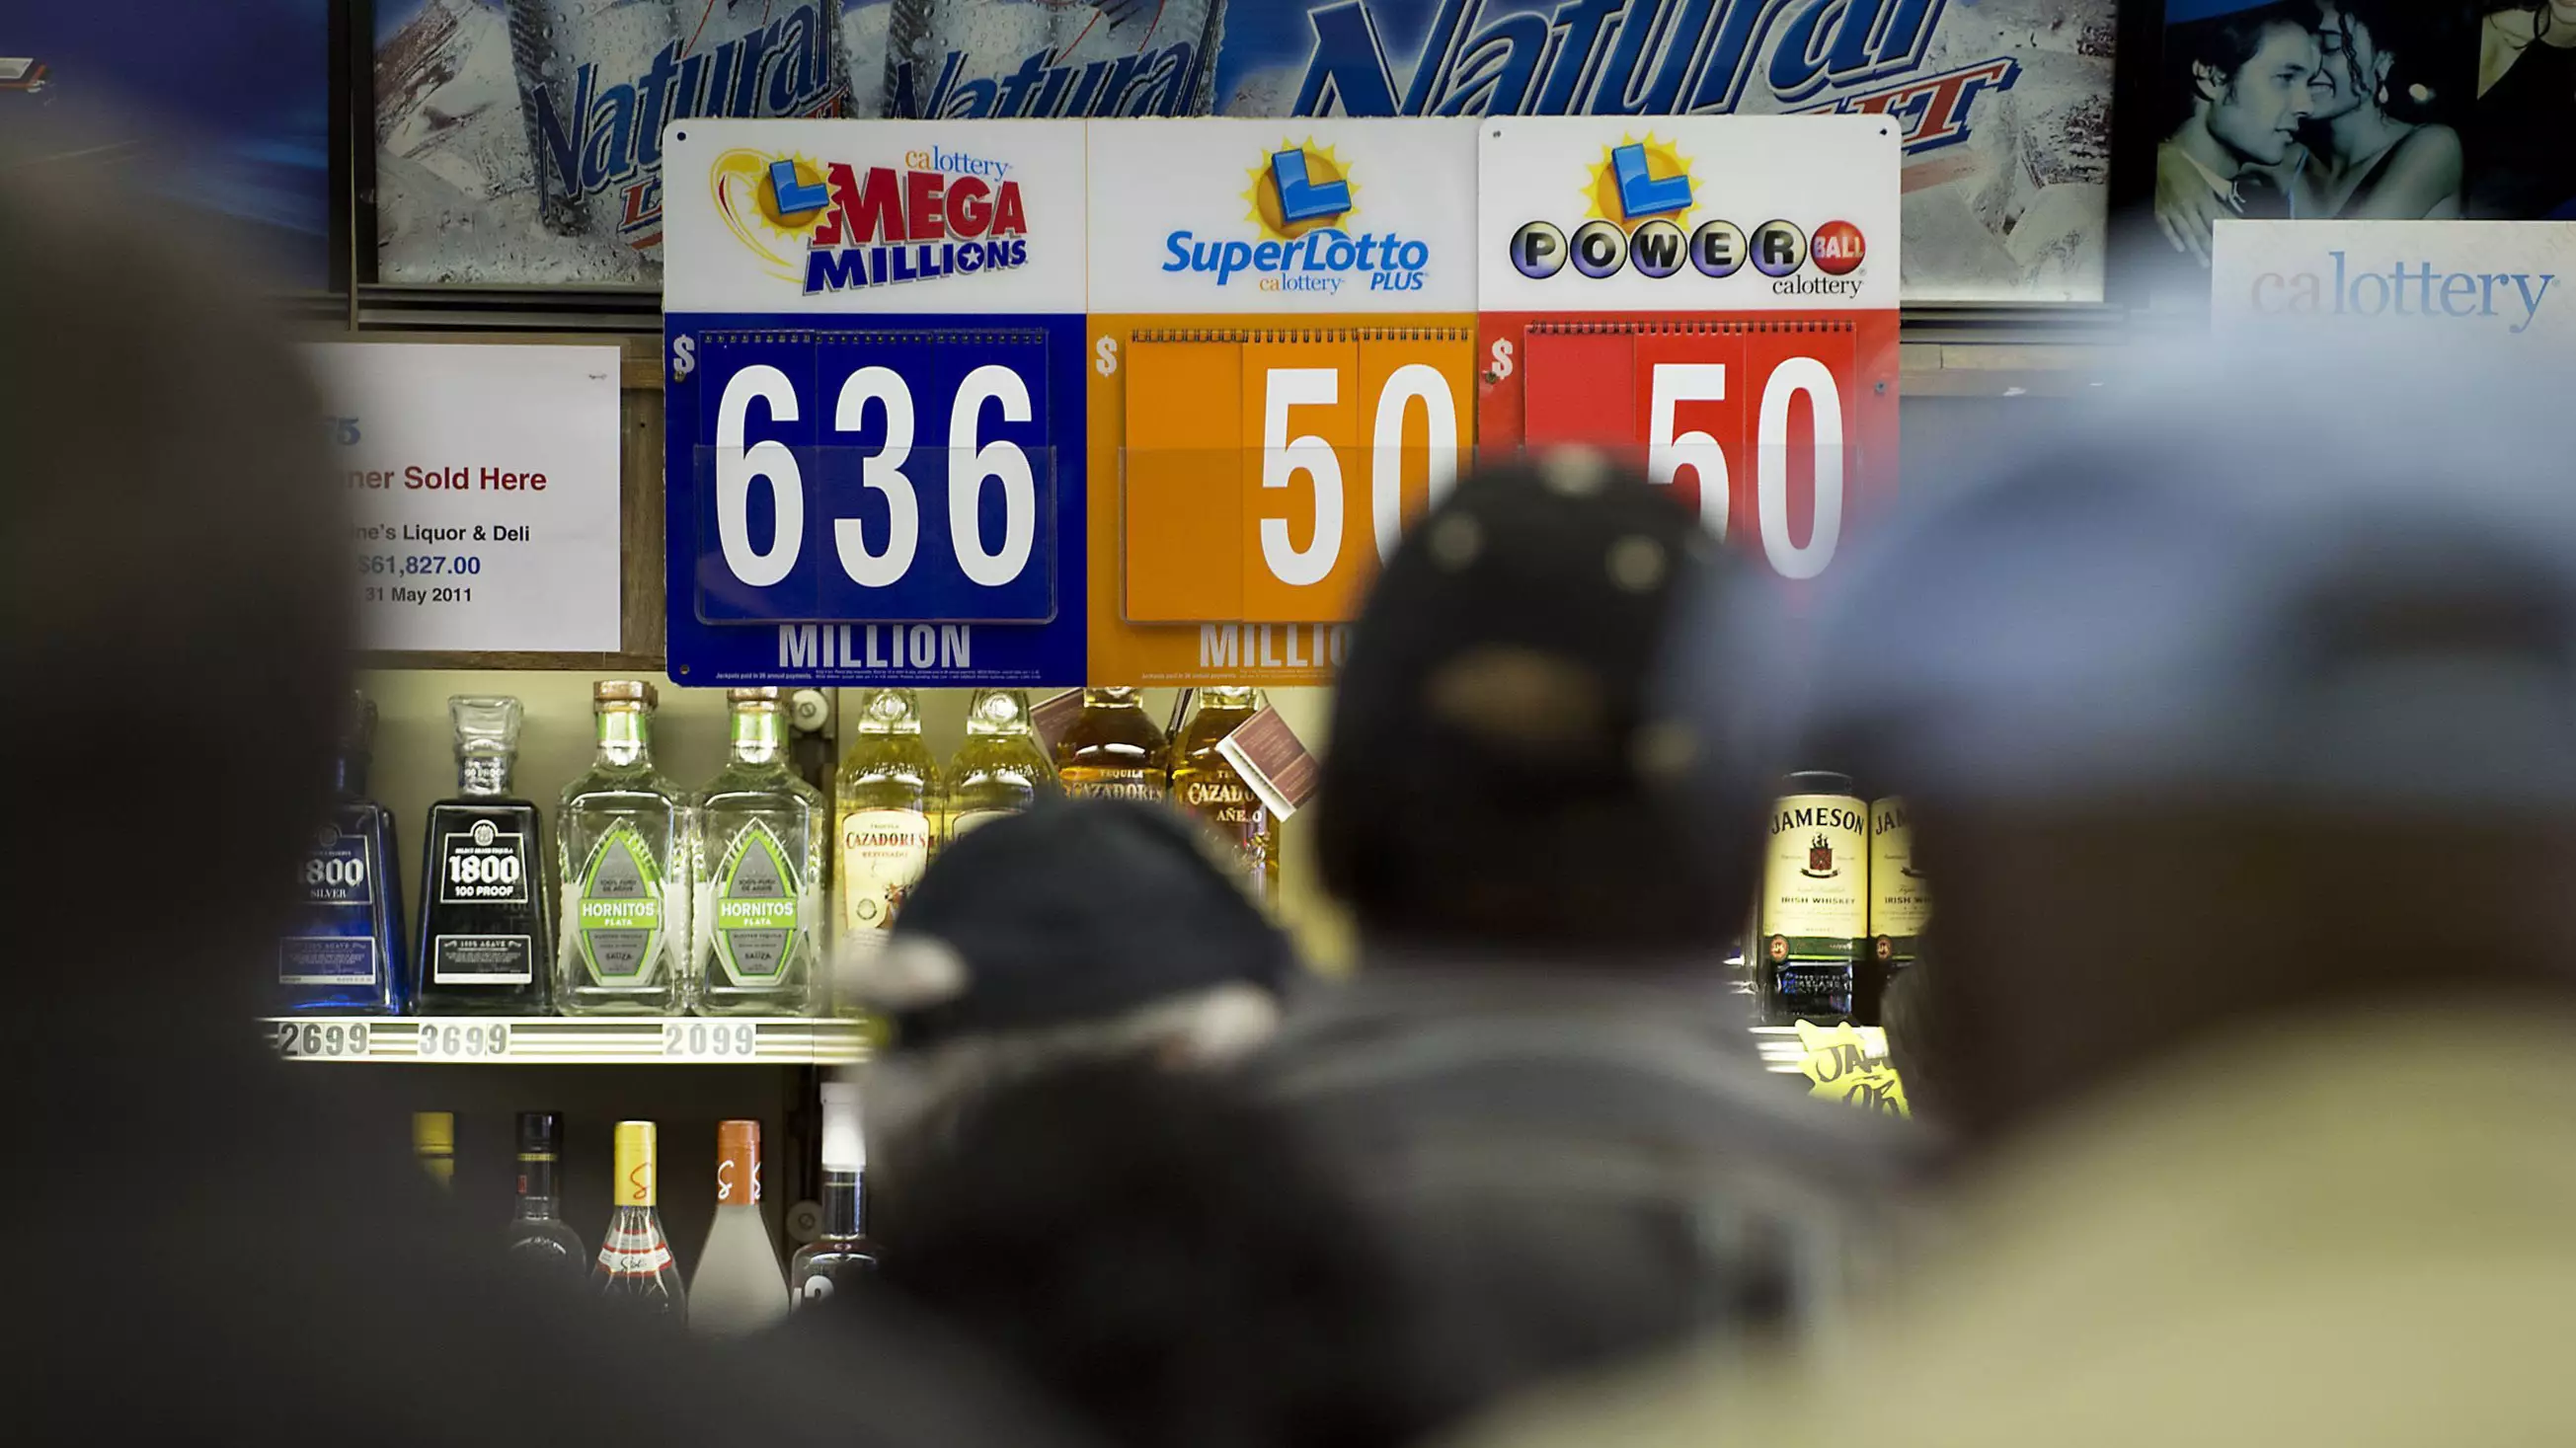 Mega Millions: What's Tonight's Jackpot And What Time Are The Numbers Drawn?